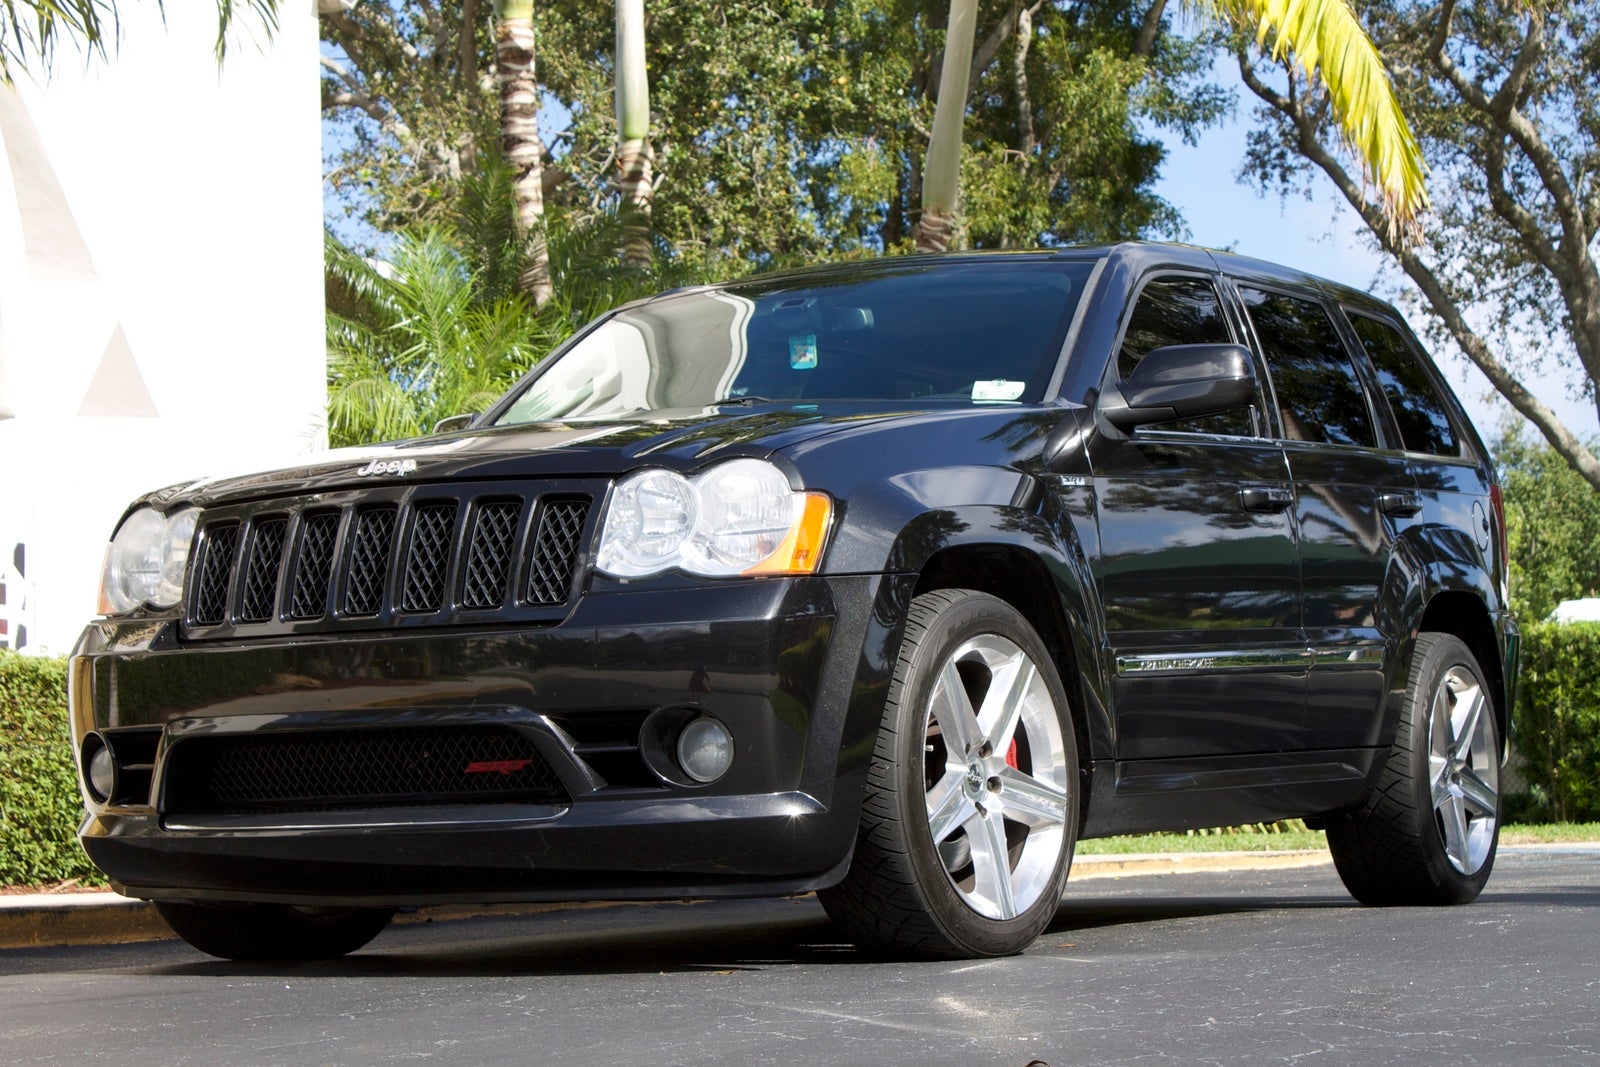 Picture of 2008 Jeep Grand Cherokee SRT8, exterior